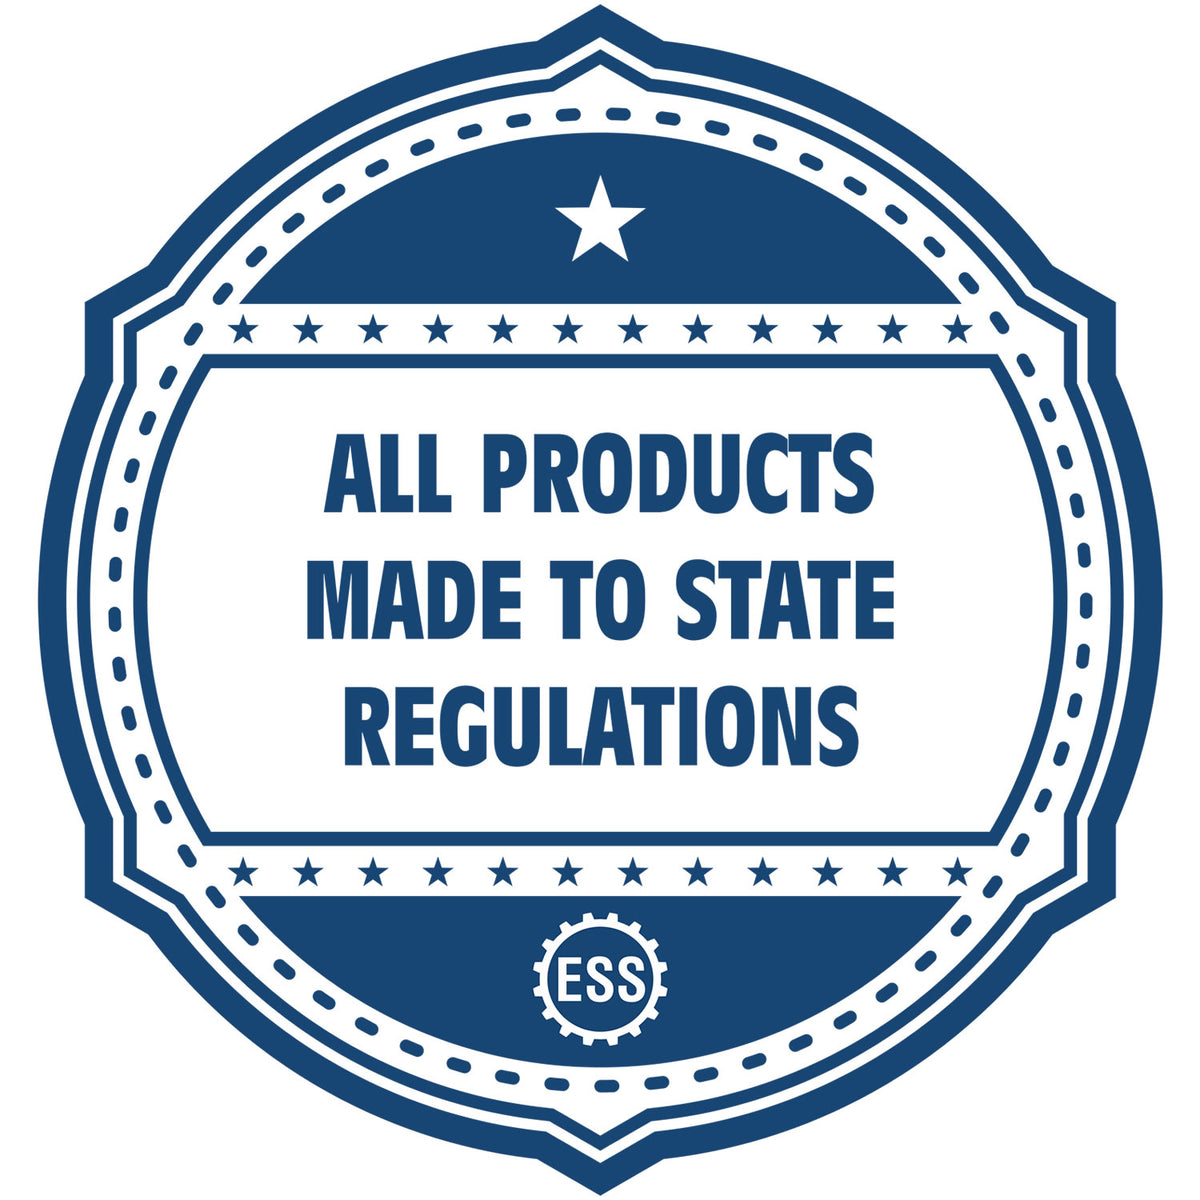 A blue icon or badge for the Gift Georgia Engineer Seal showing that this product is made in compliance with state regulations.